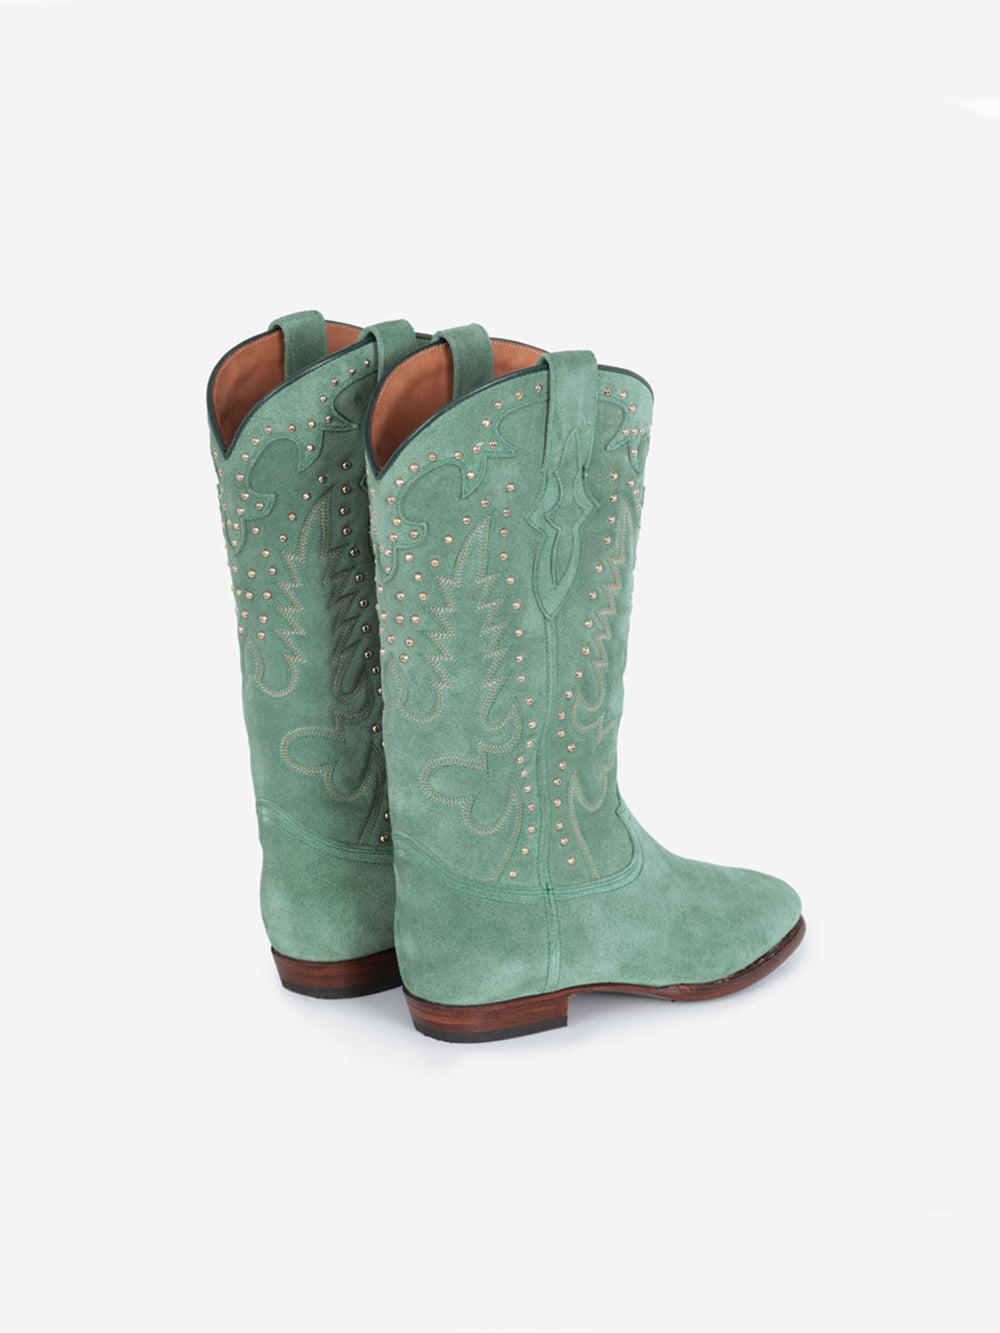 SANTIAG STUDS BOOTS IN MINT GREEN SUEDE